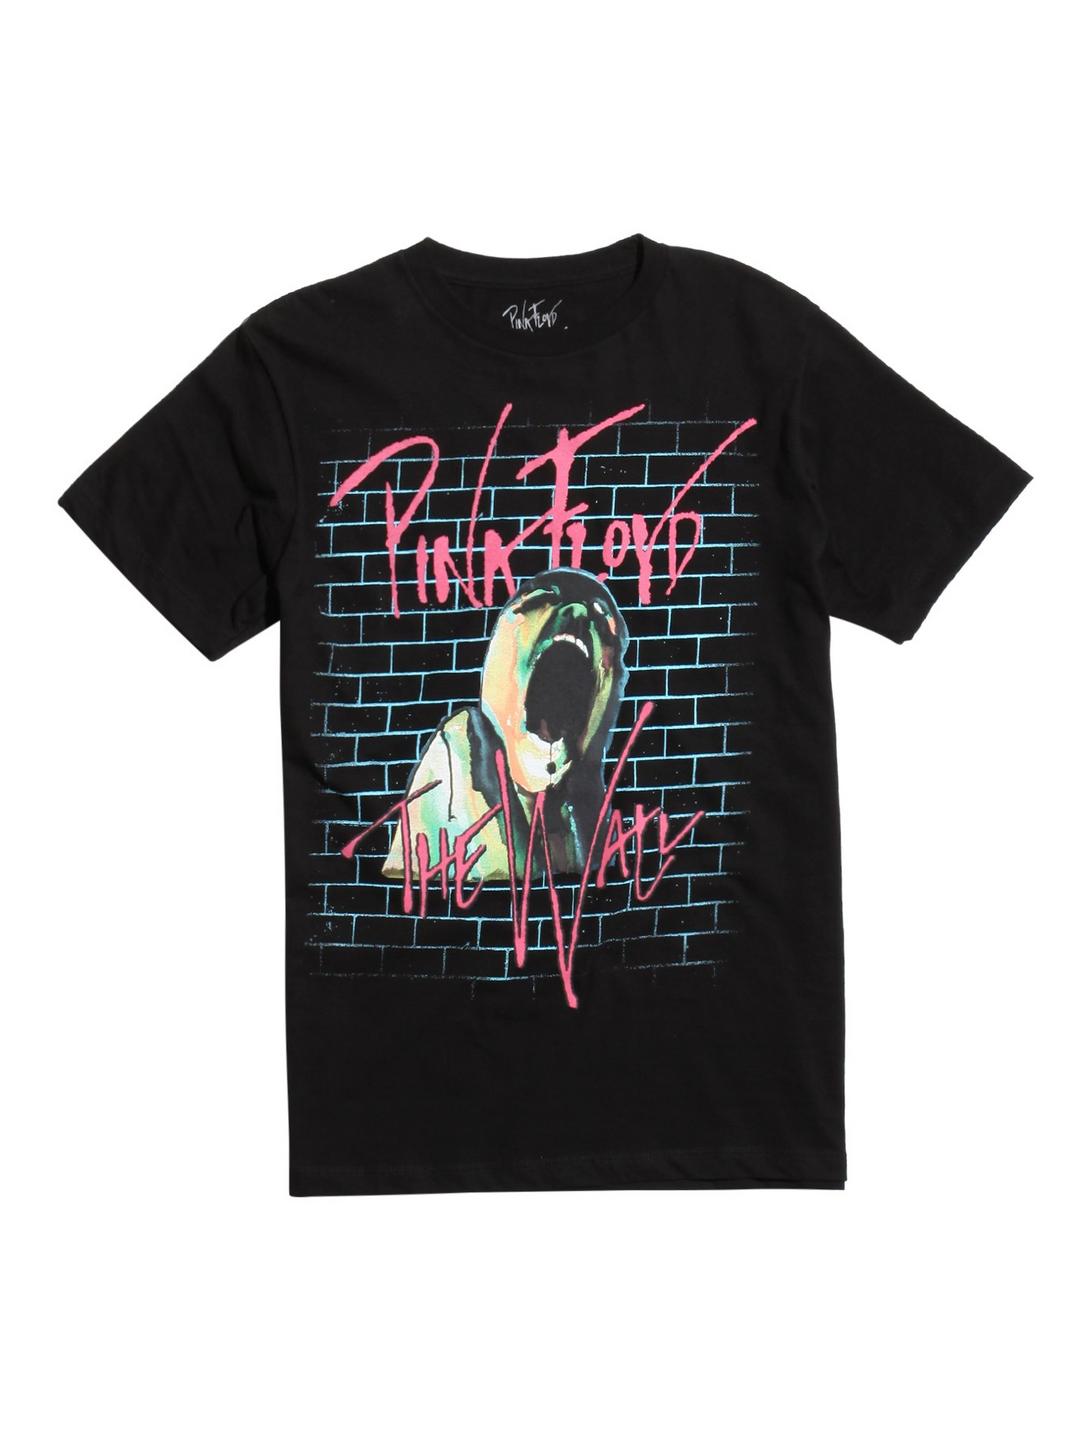 Pink Floyd t shirt THE WALL SCREAM Sizes S to 6X